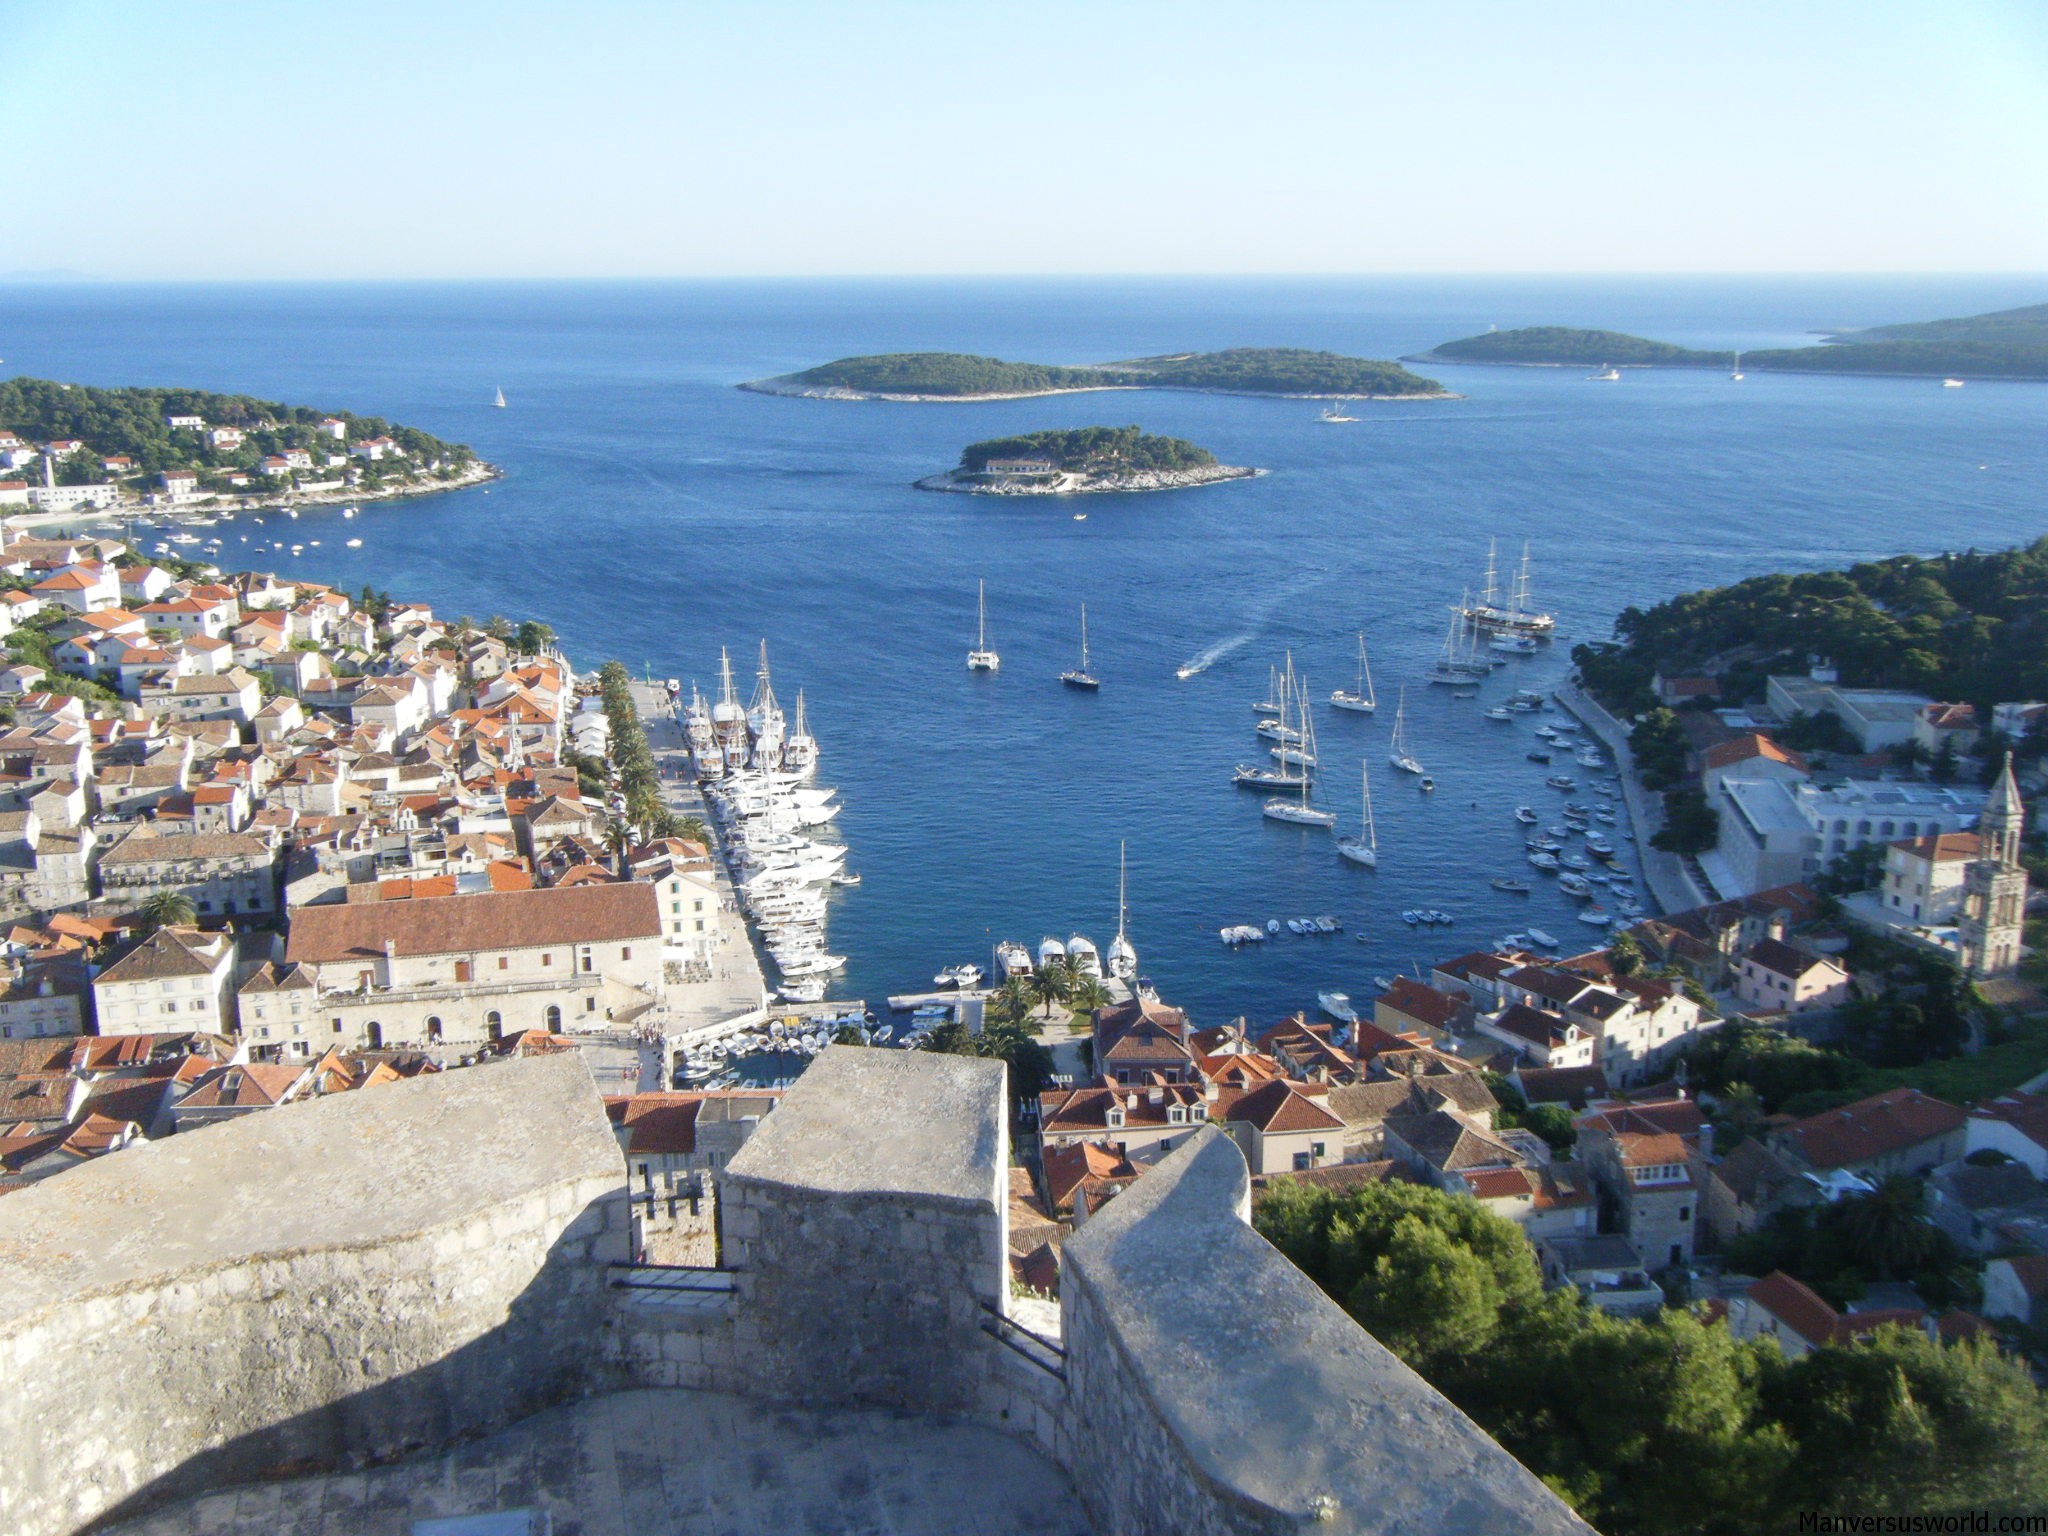 The view from Hvar's mountain-top fortfications in Croatia